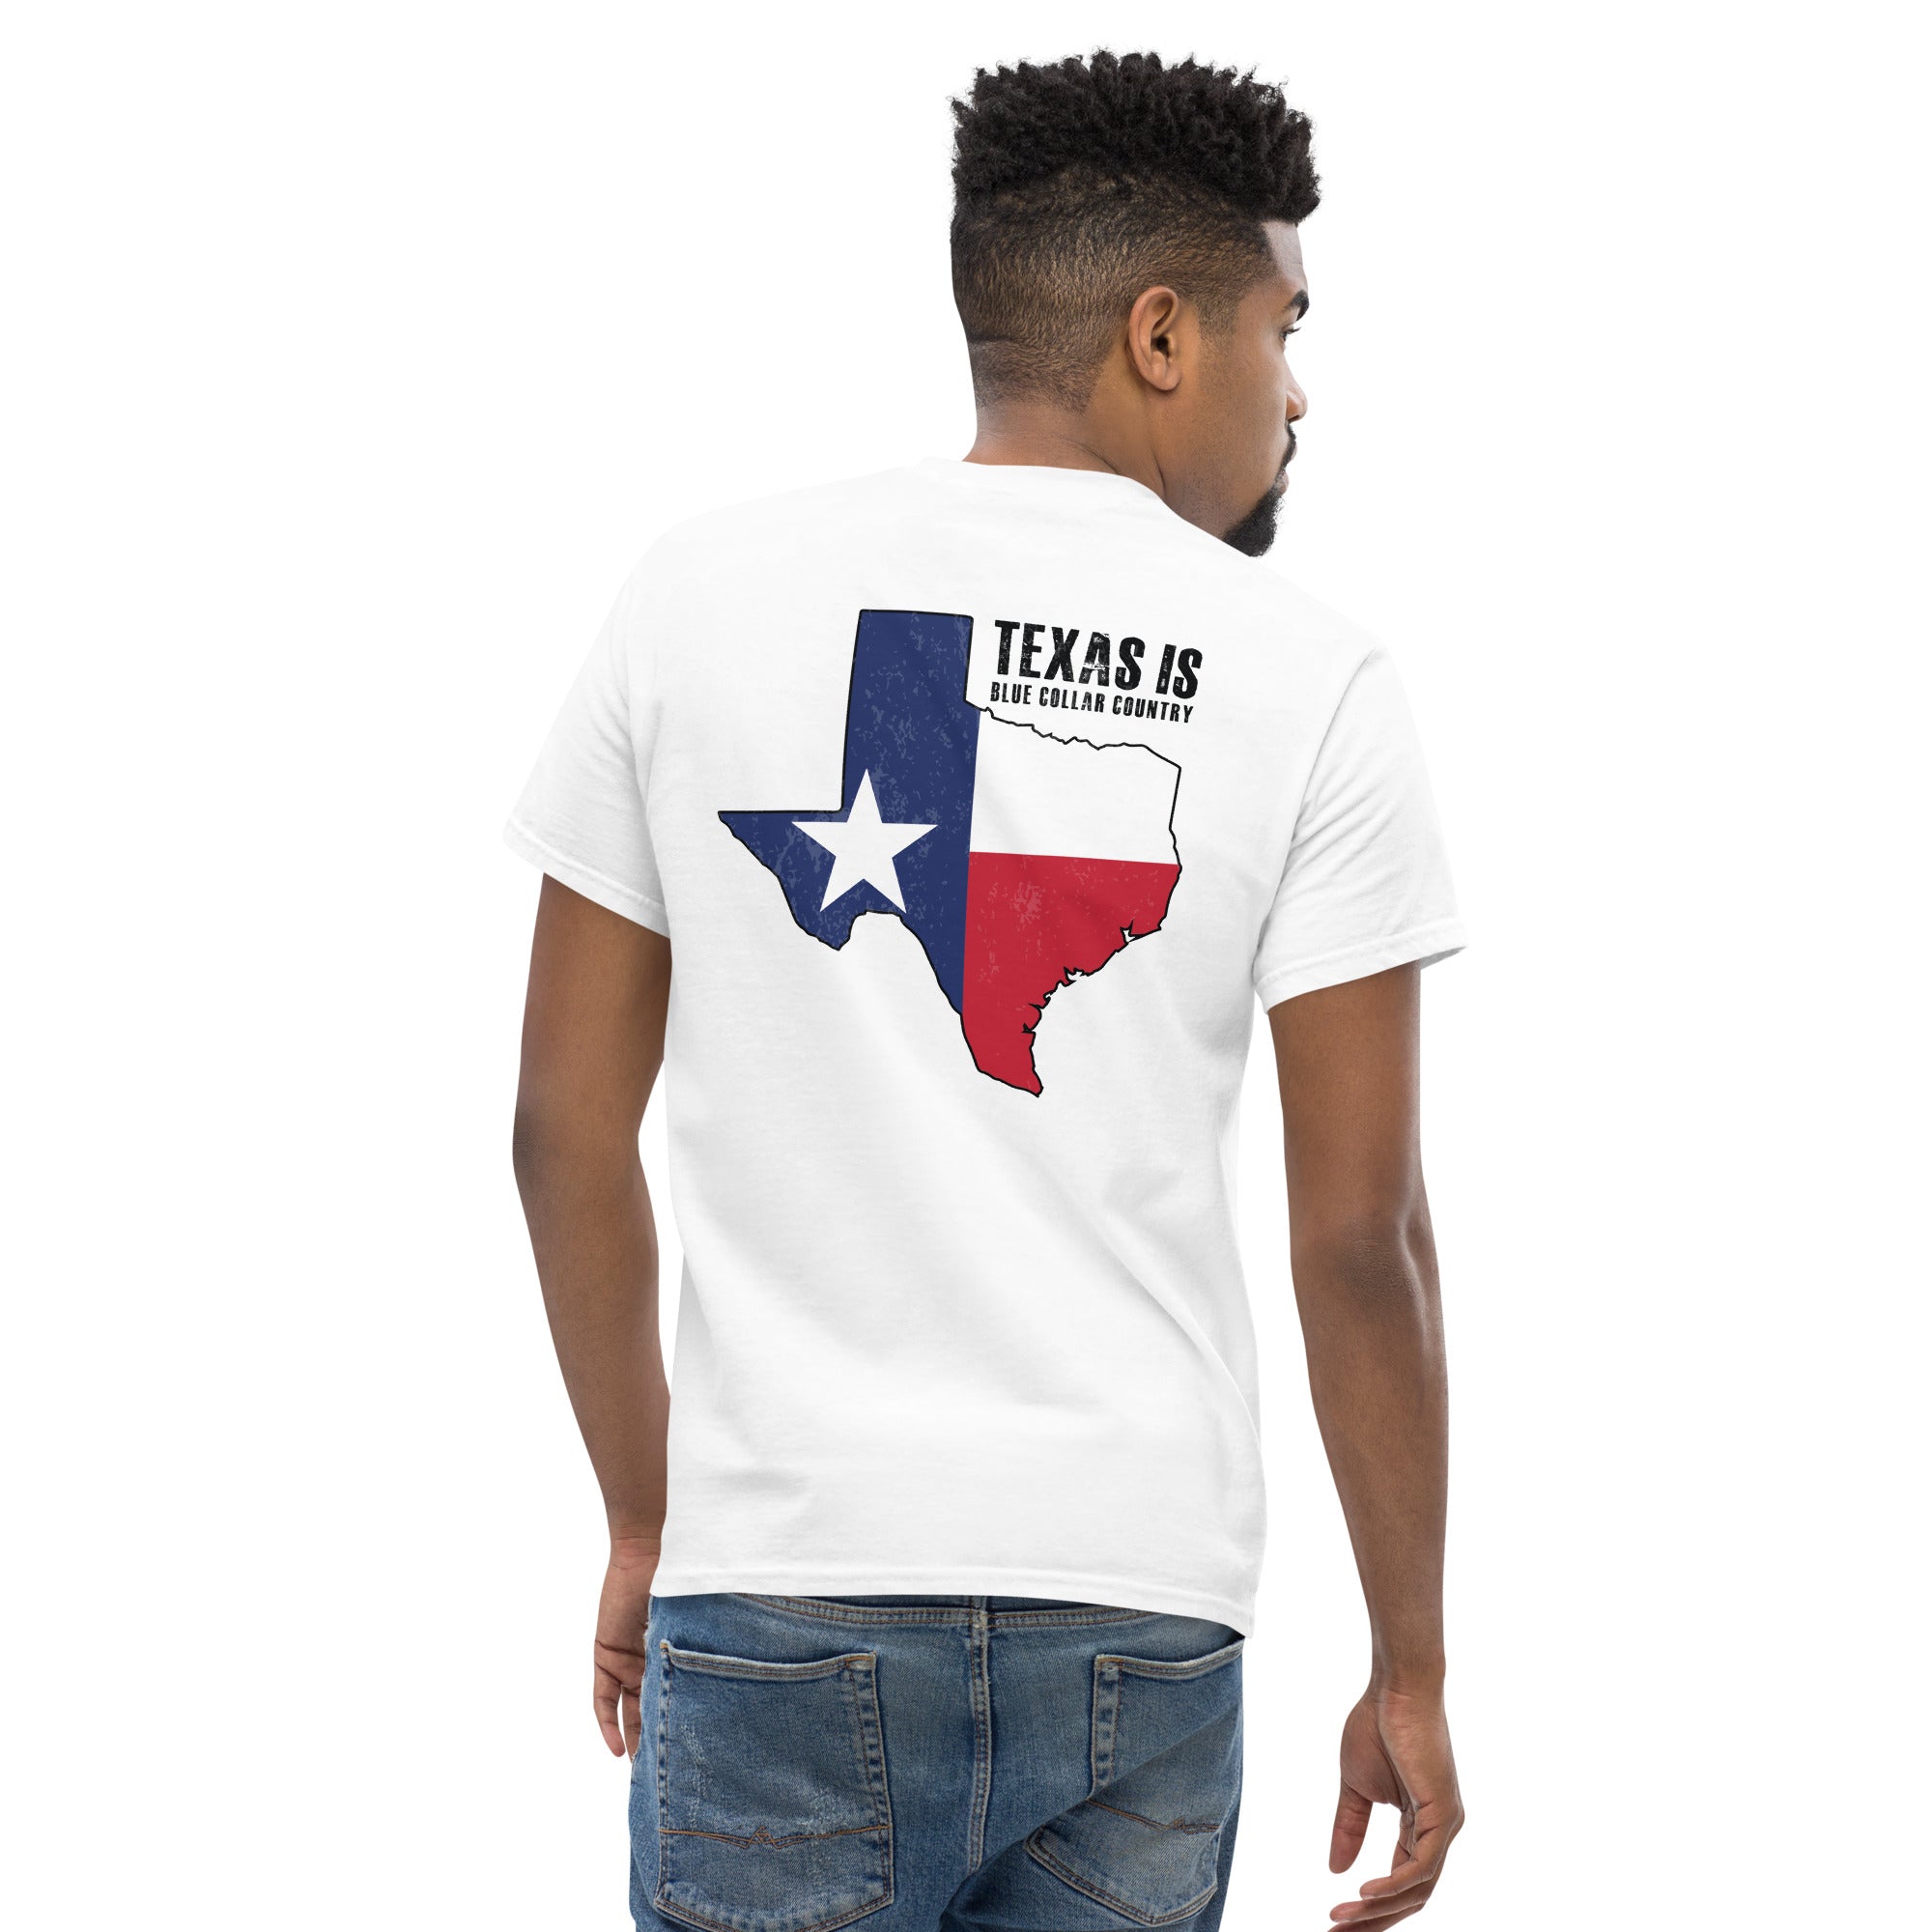 Texas is Blue Collar Country  I  Men's classic tee